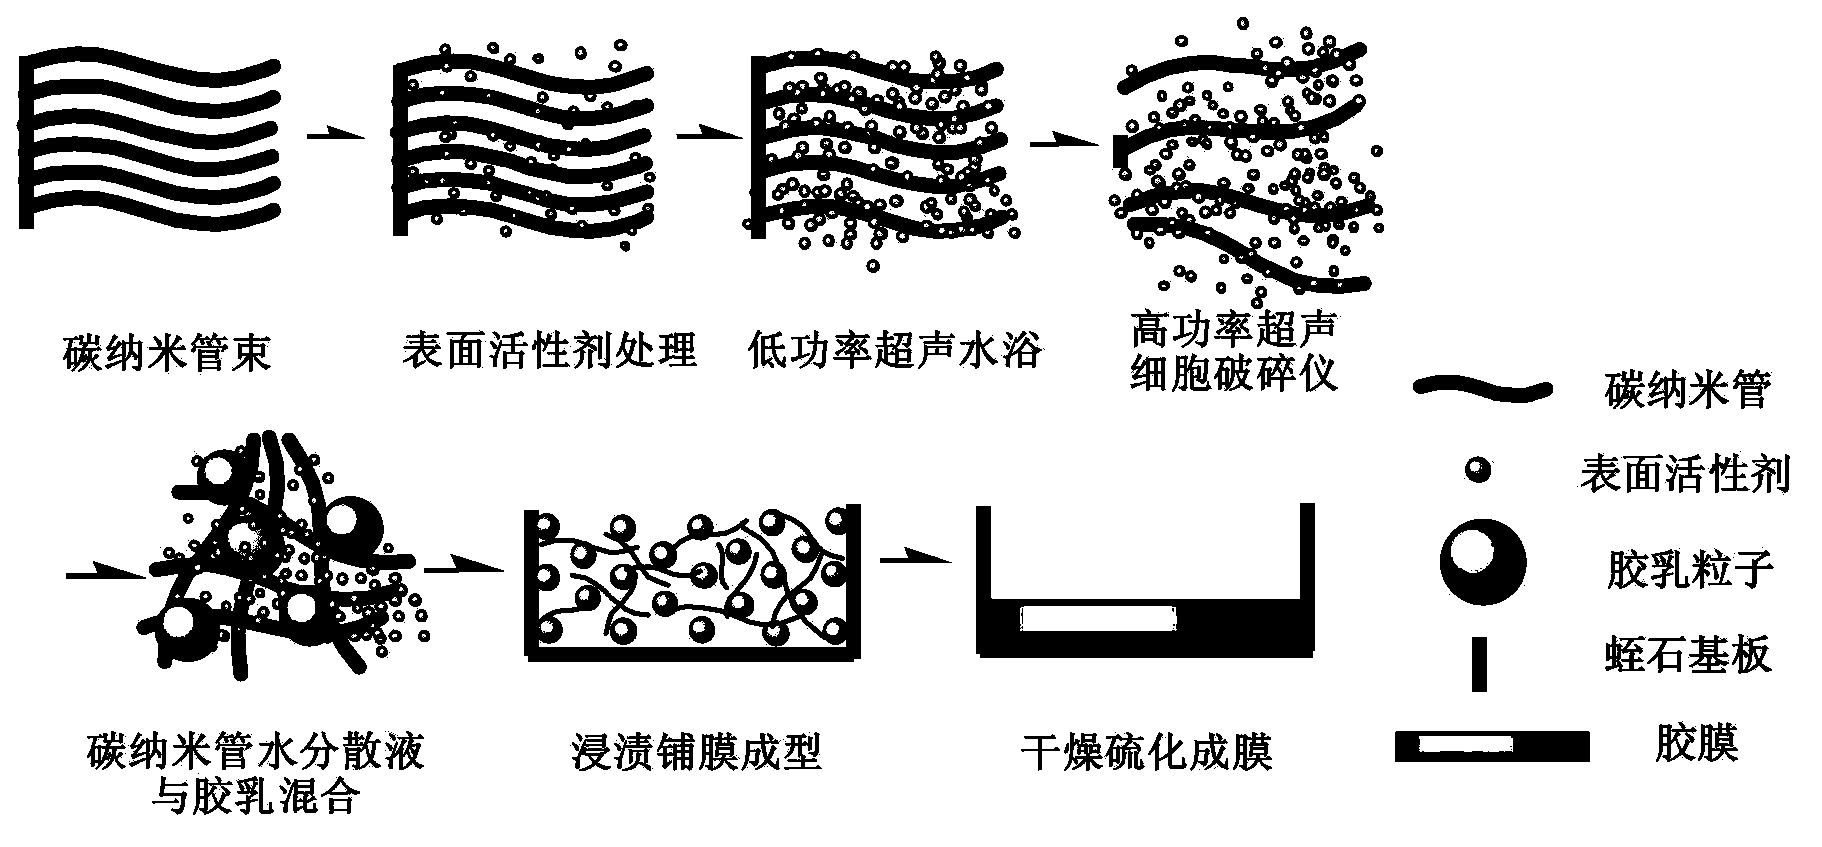 High-conductivity carbon nanotube/rubber nanocomposite and preparation method thereof